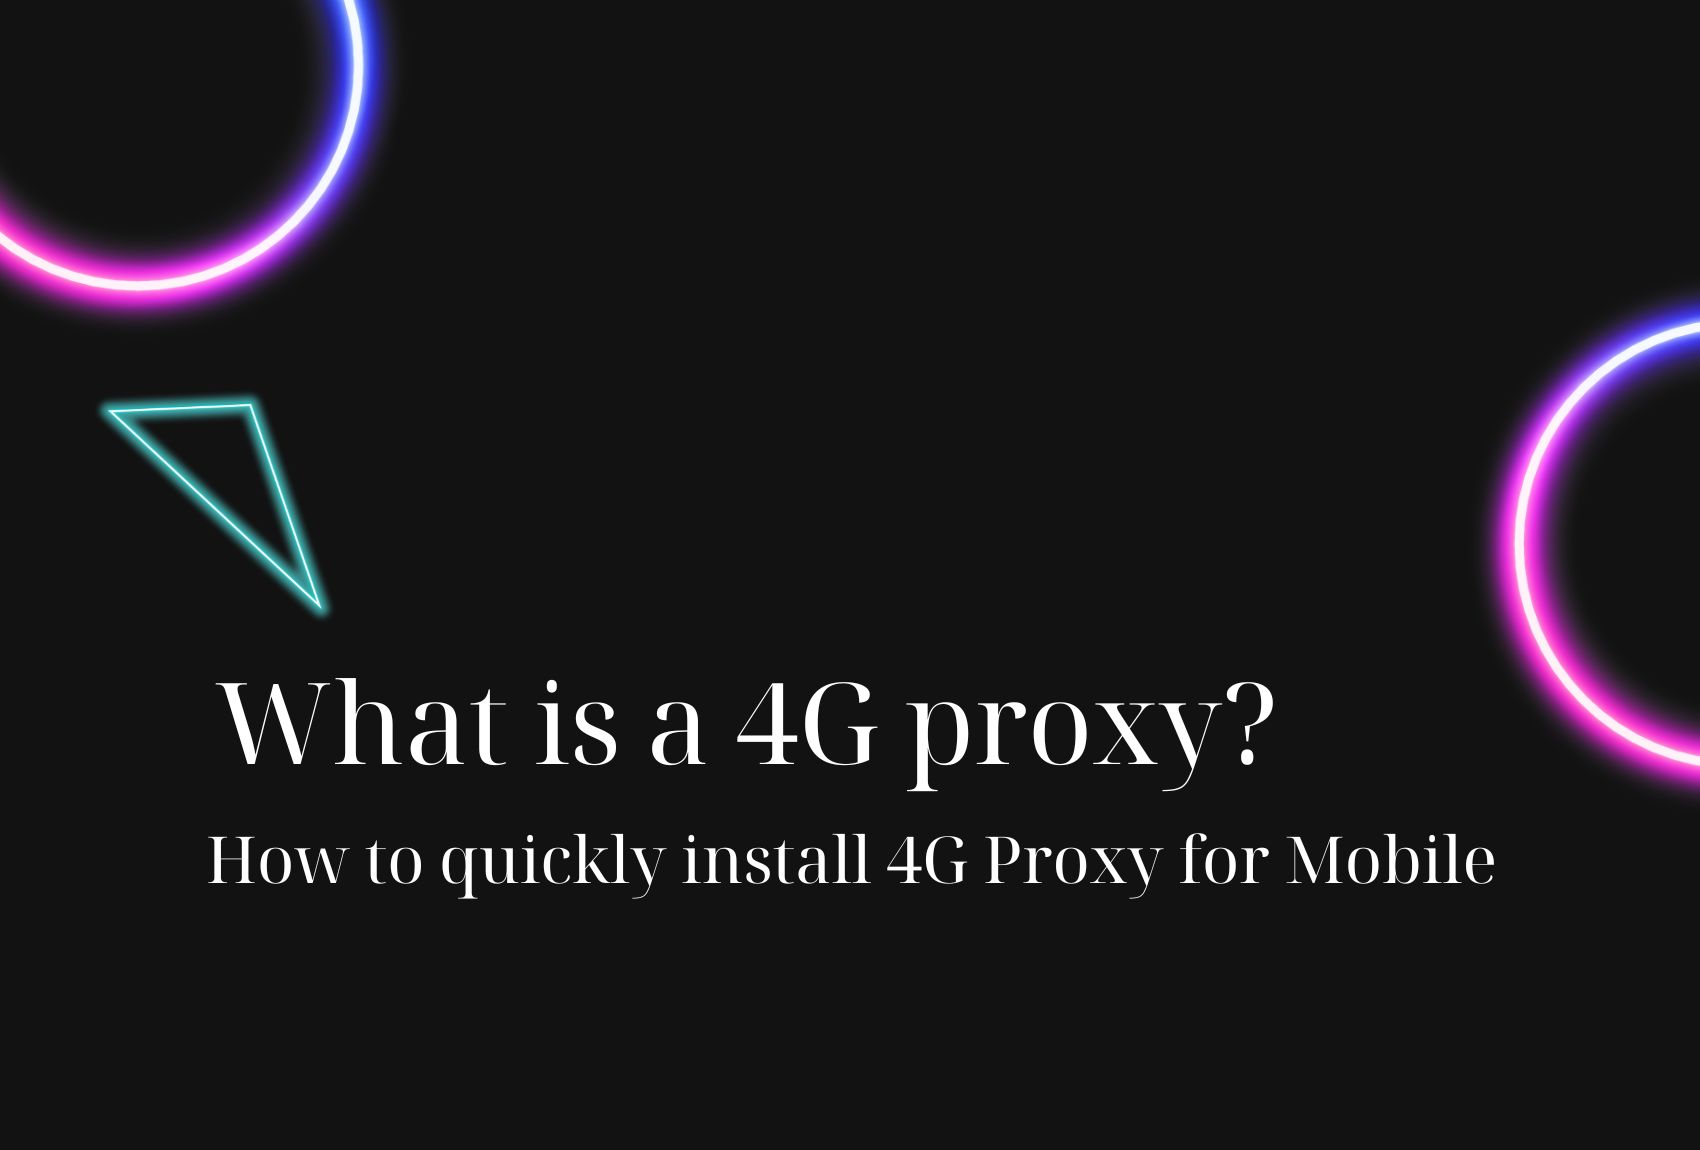 What is a 4G proxy? How to quickly install 4G Proxy for Mobile